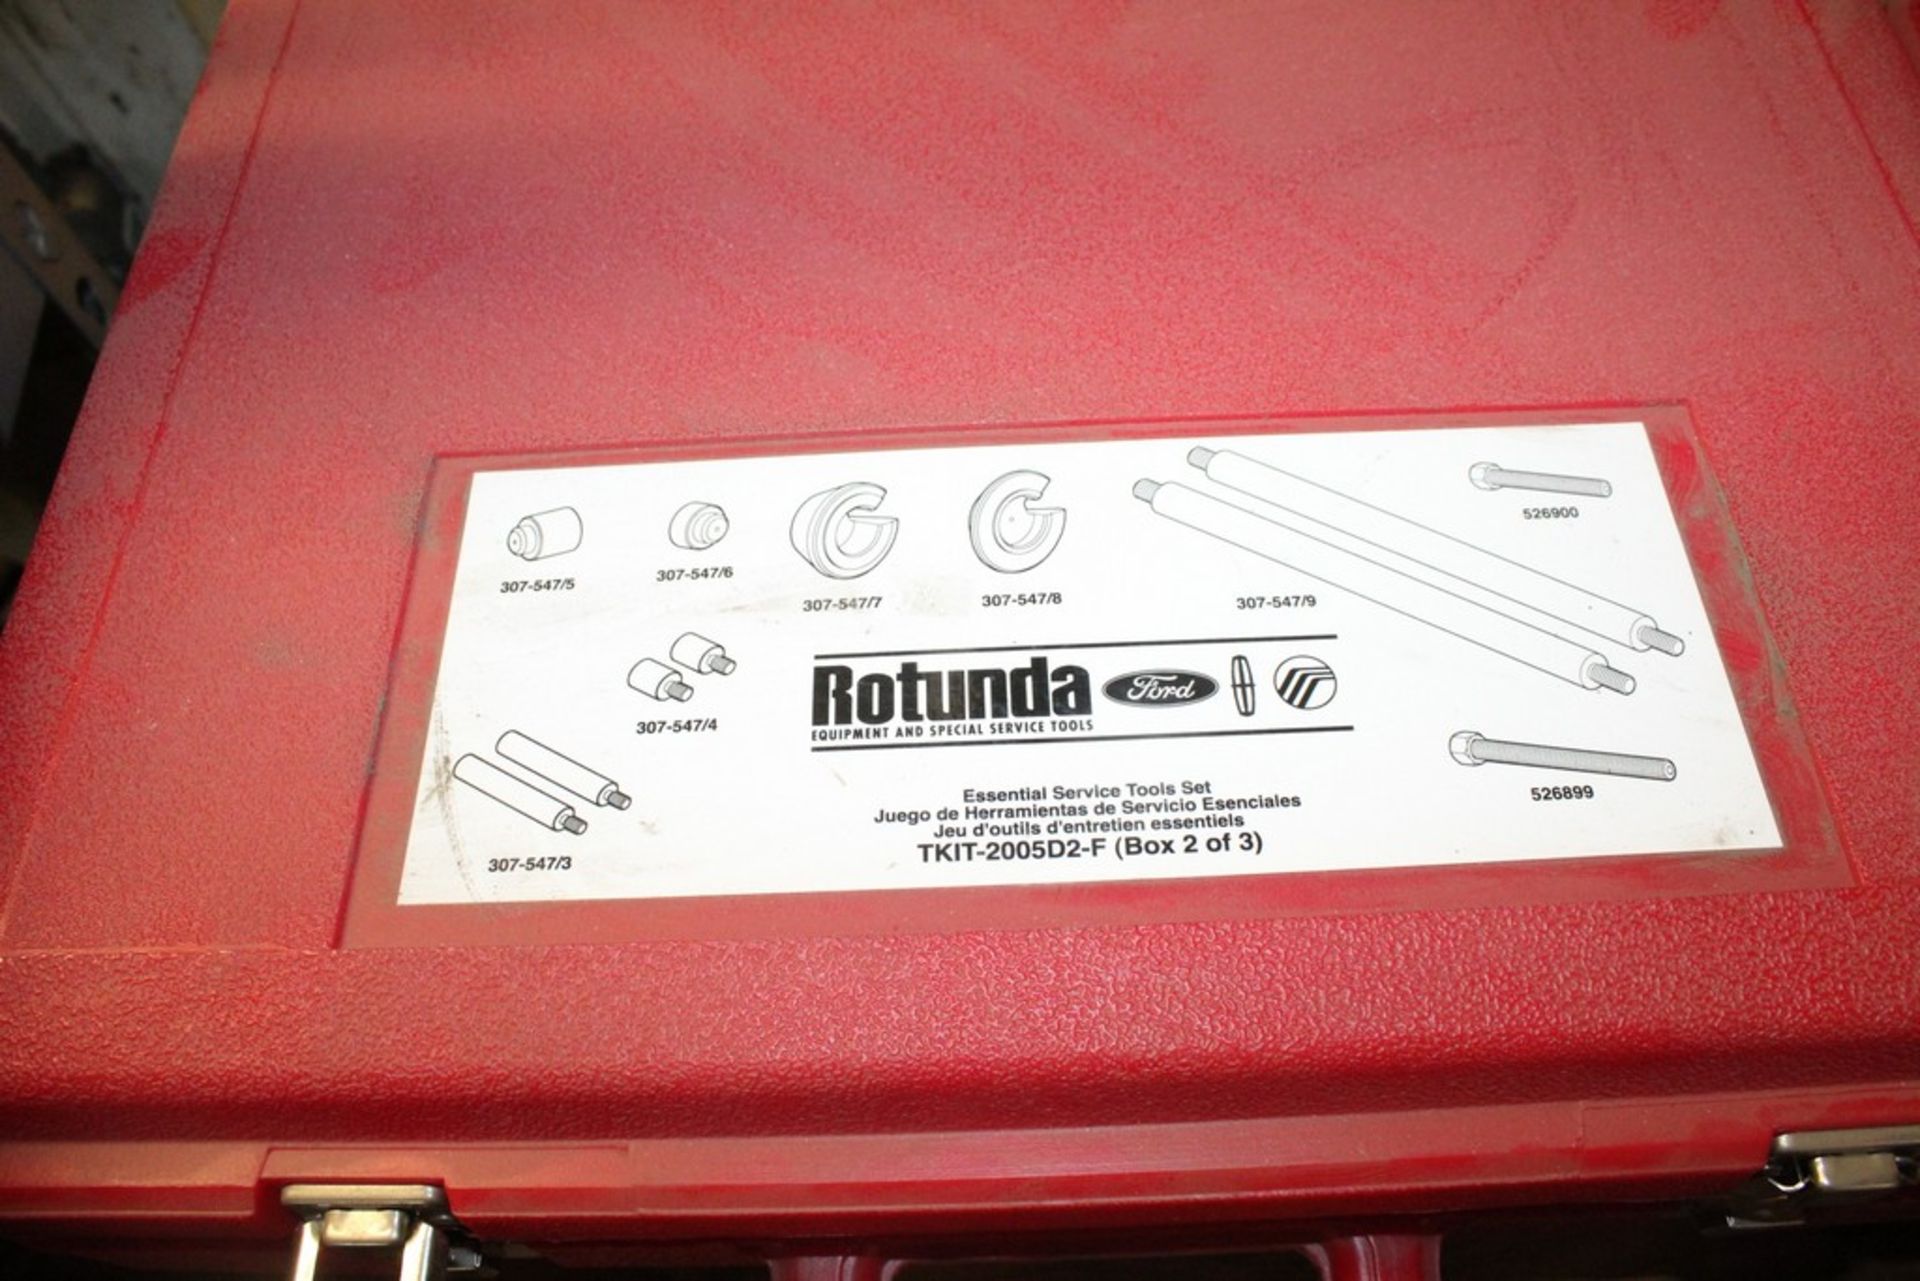 FORD ROTUNDA ESSENTIAL SERVICE TOOL SET-TKIT-2005D2-F IN THREE CASES - Image 2 of 5